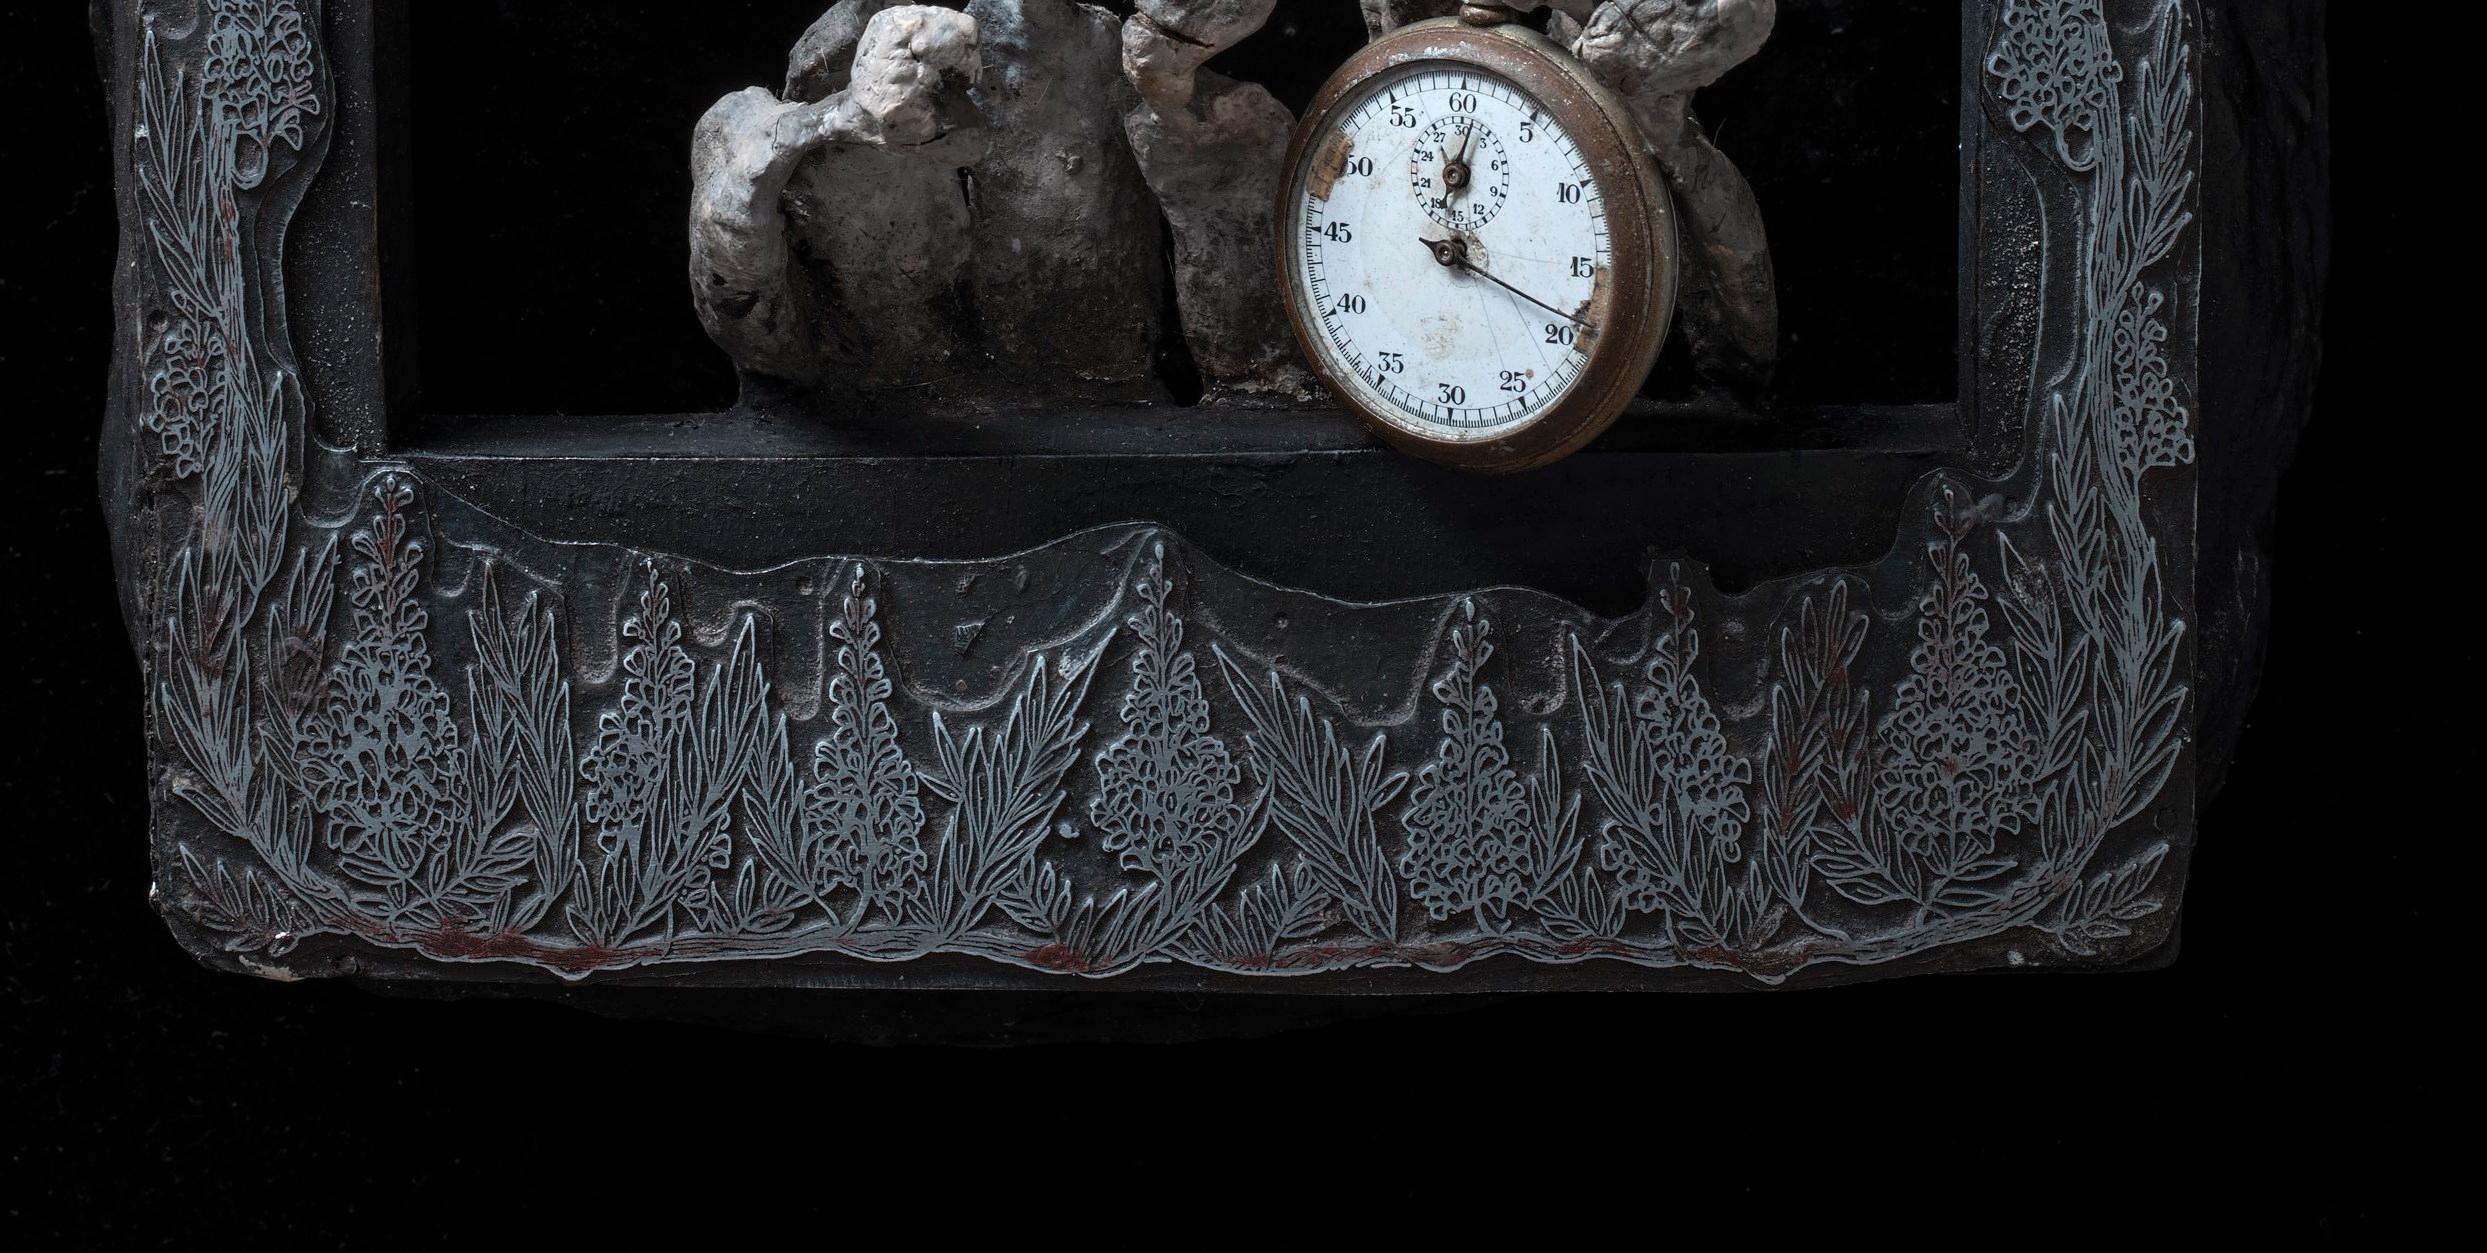 Outsider Art Wall Sculpture: 'It's Time' - Black Figurative Sculpture by Gerard Cambon